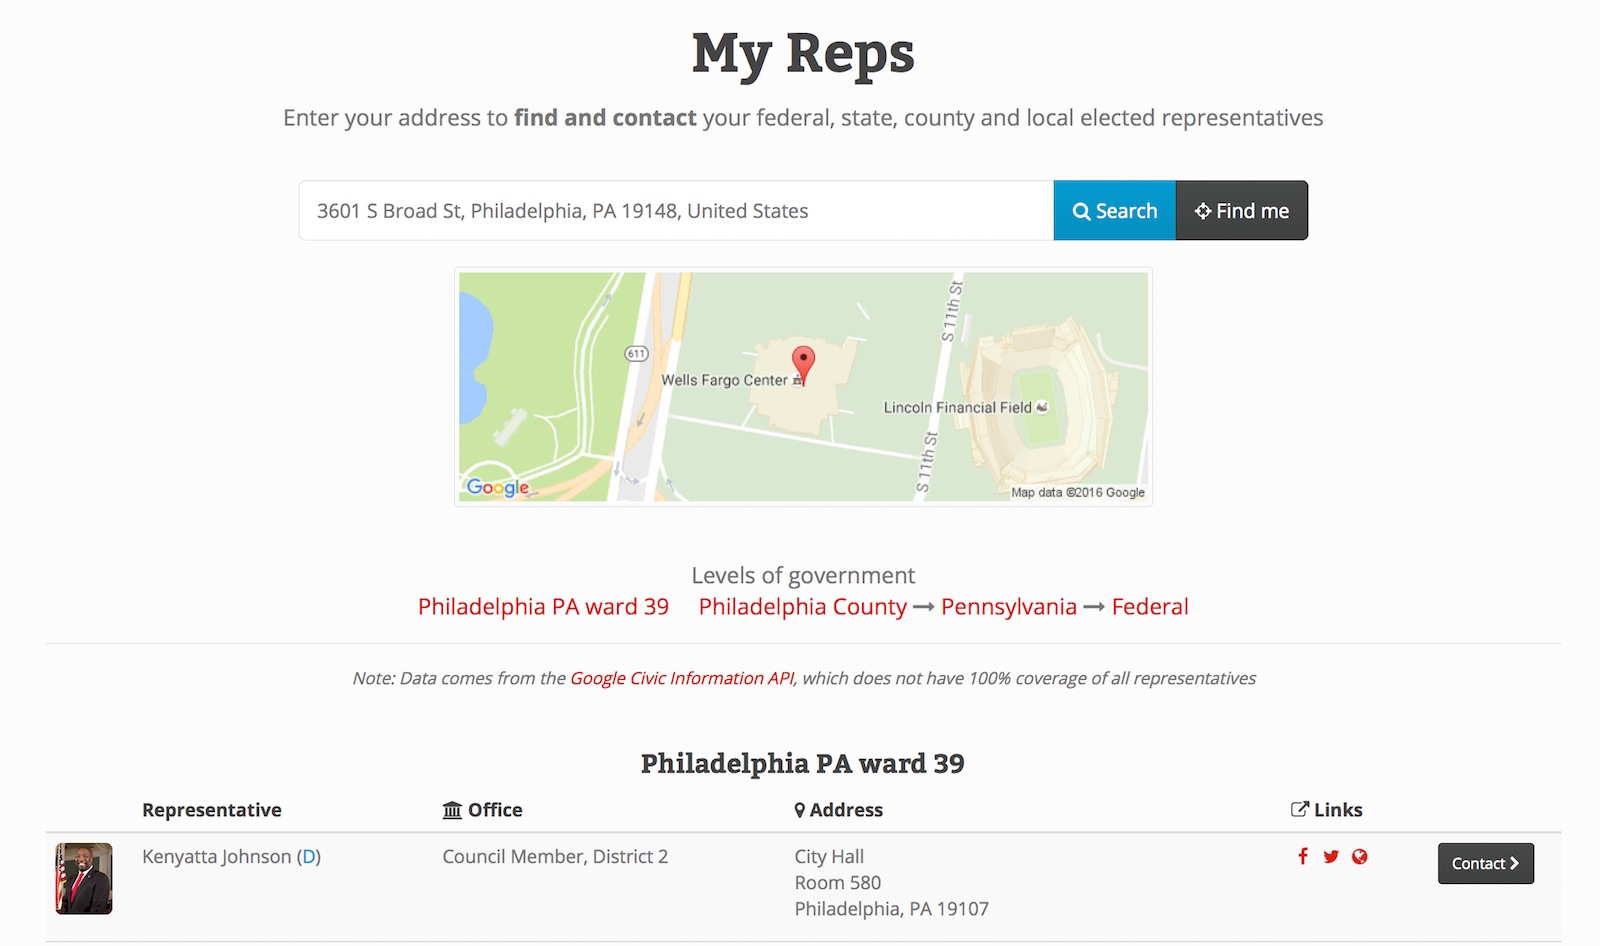 Searching for representatives in Philly's 39th ward